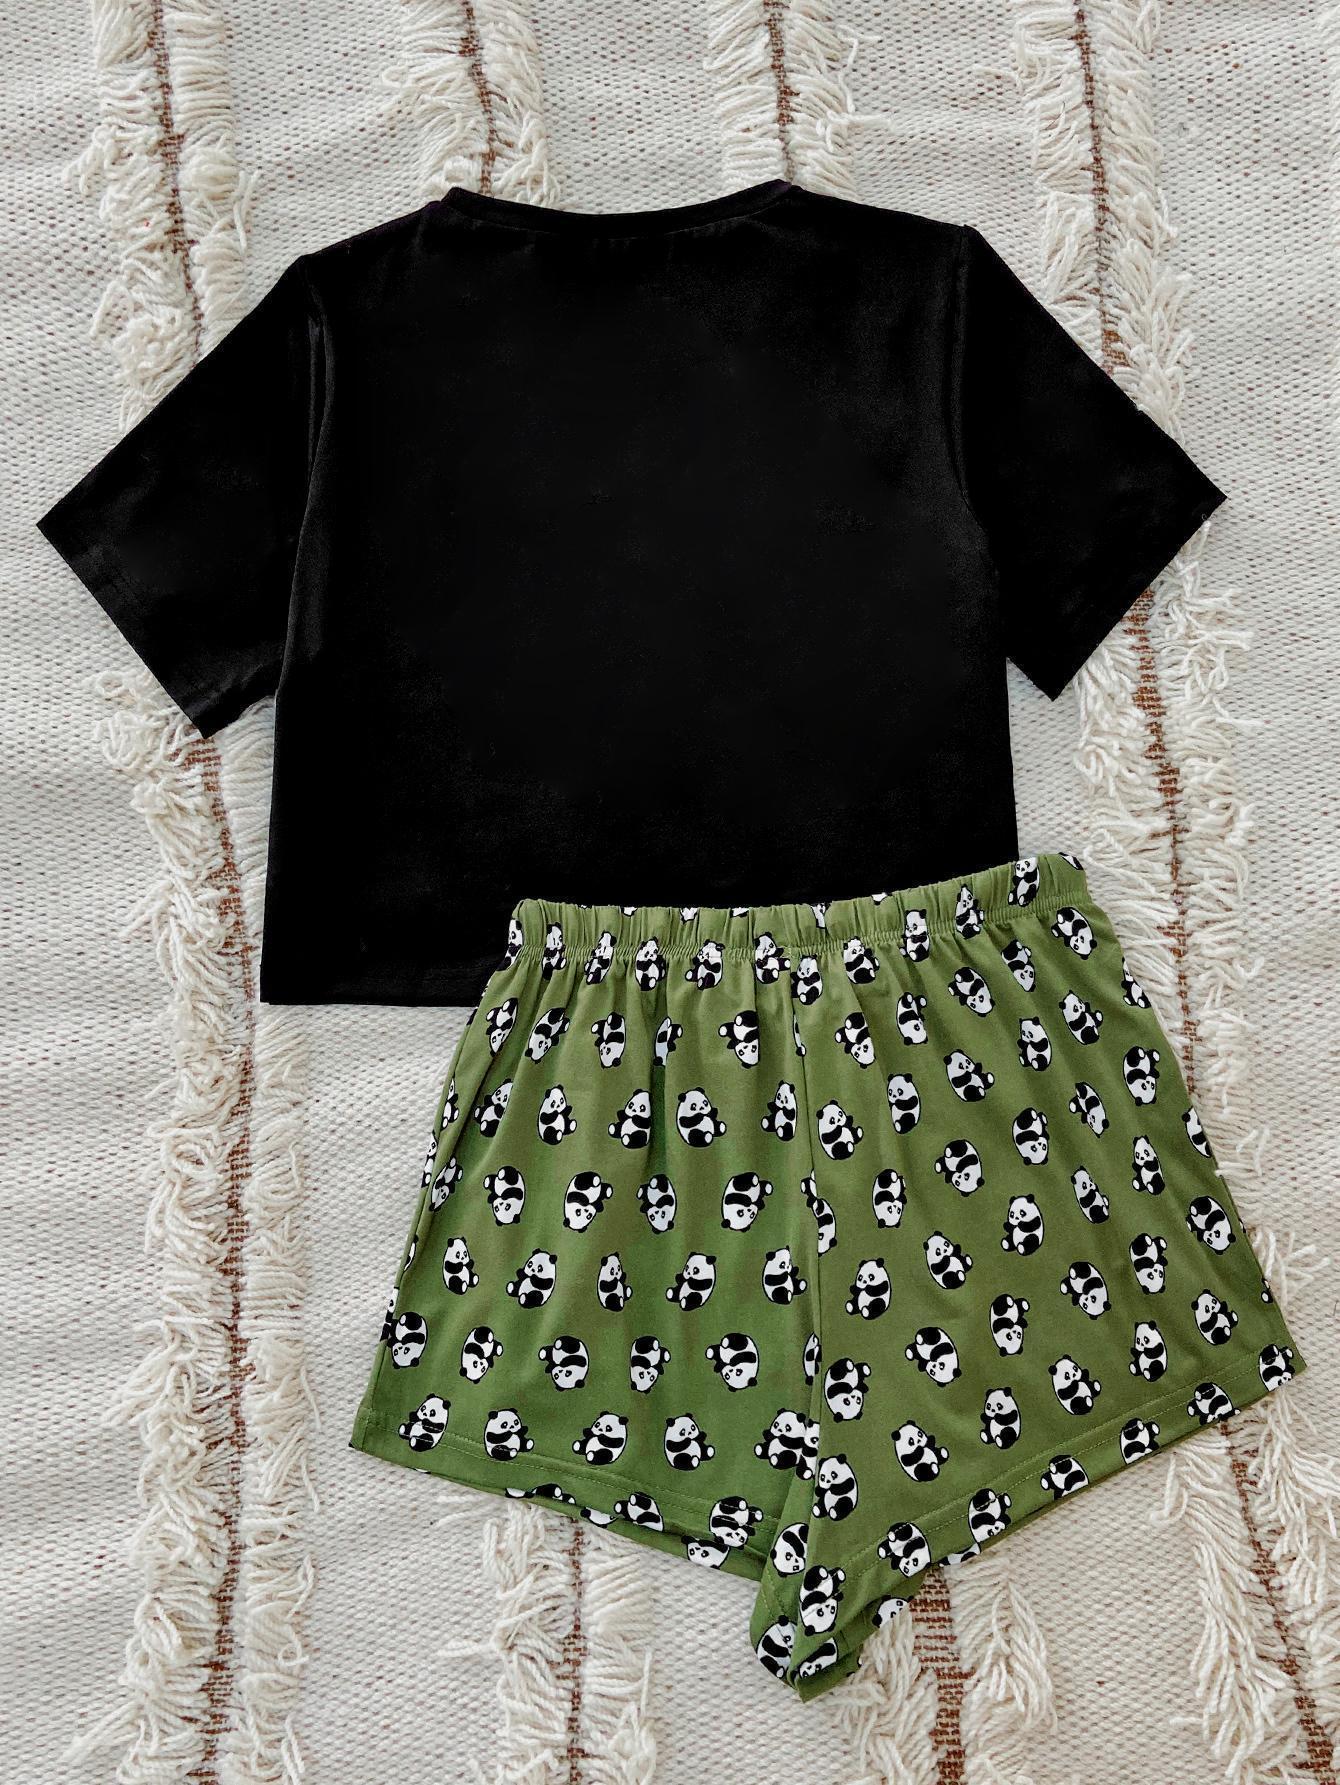 Graphic Tee and Panda Print Shorts Lounge Set - Tophatter Deals and Online Shopping - Electronics, Jewelry, Beauty, Health, Gadgets, Fashion - Tophatter's Discounts & Offers - tophatters